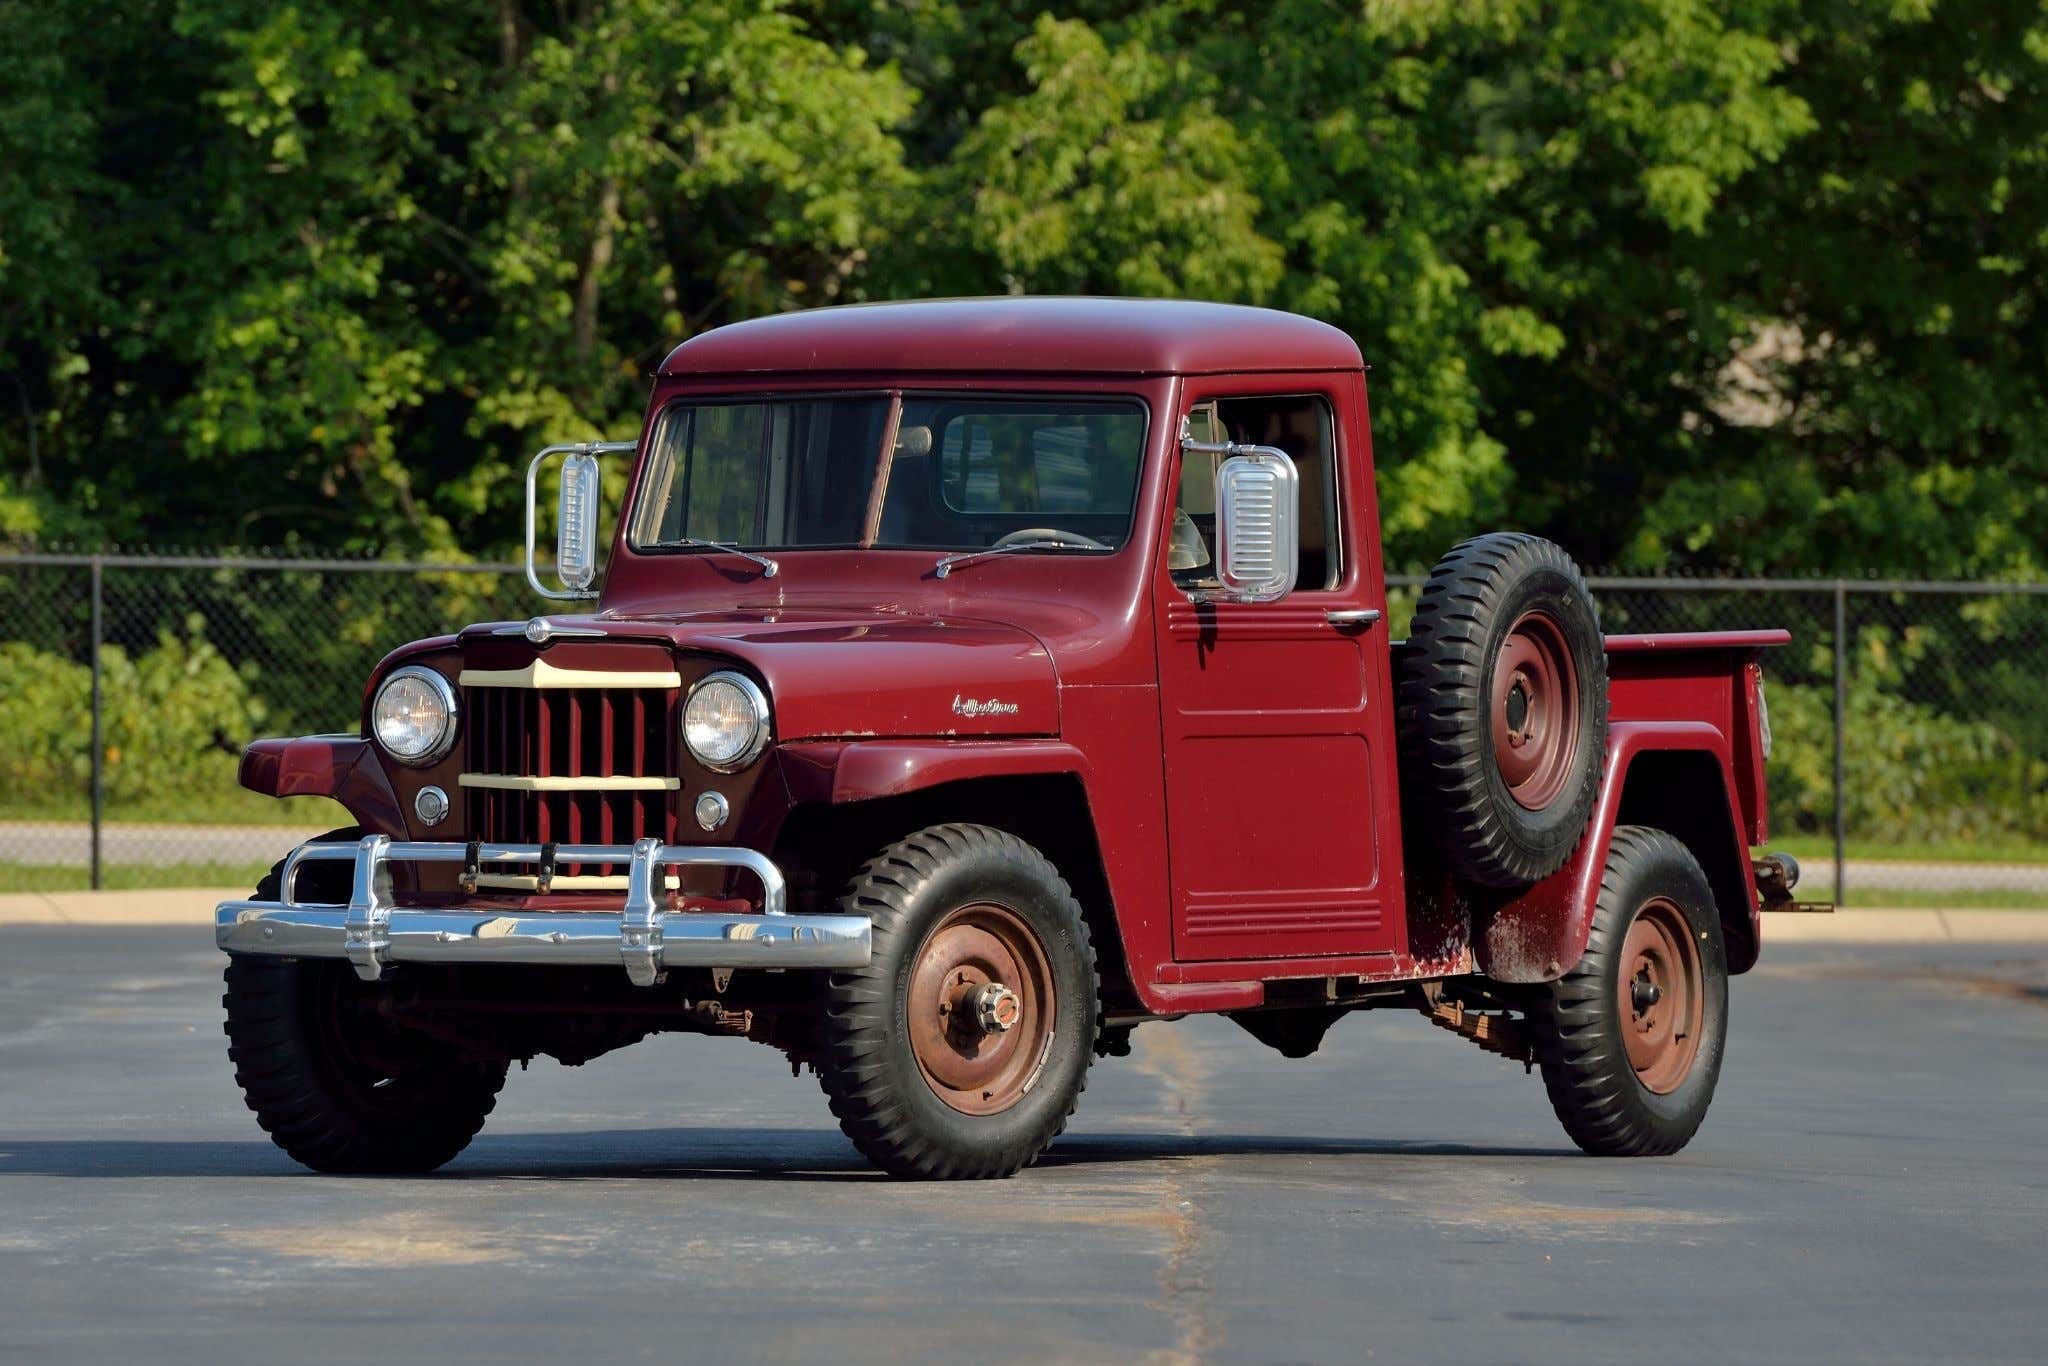 1953 Willy Jeep Pickup truck